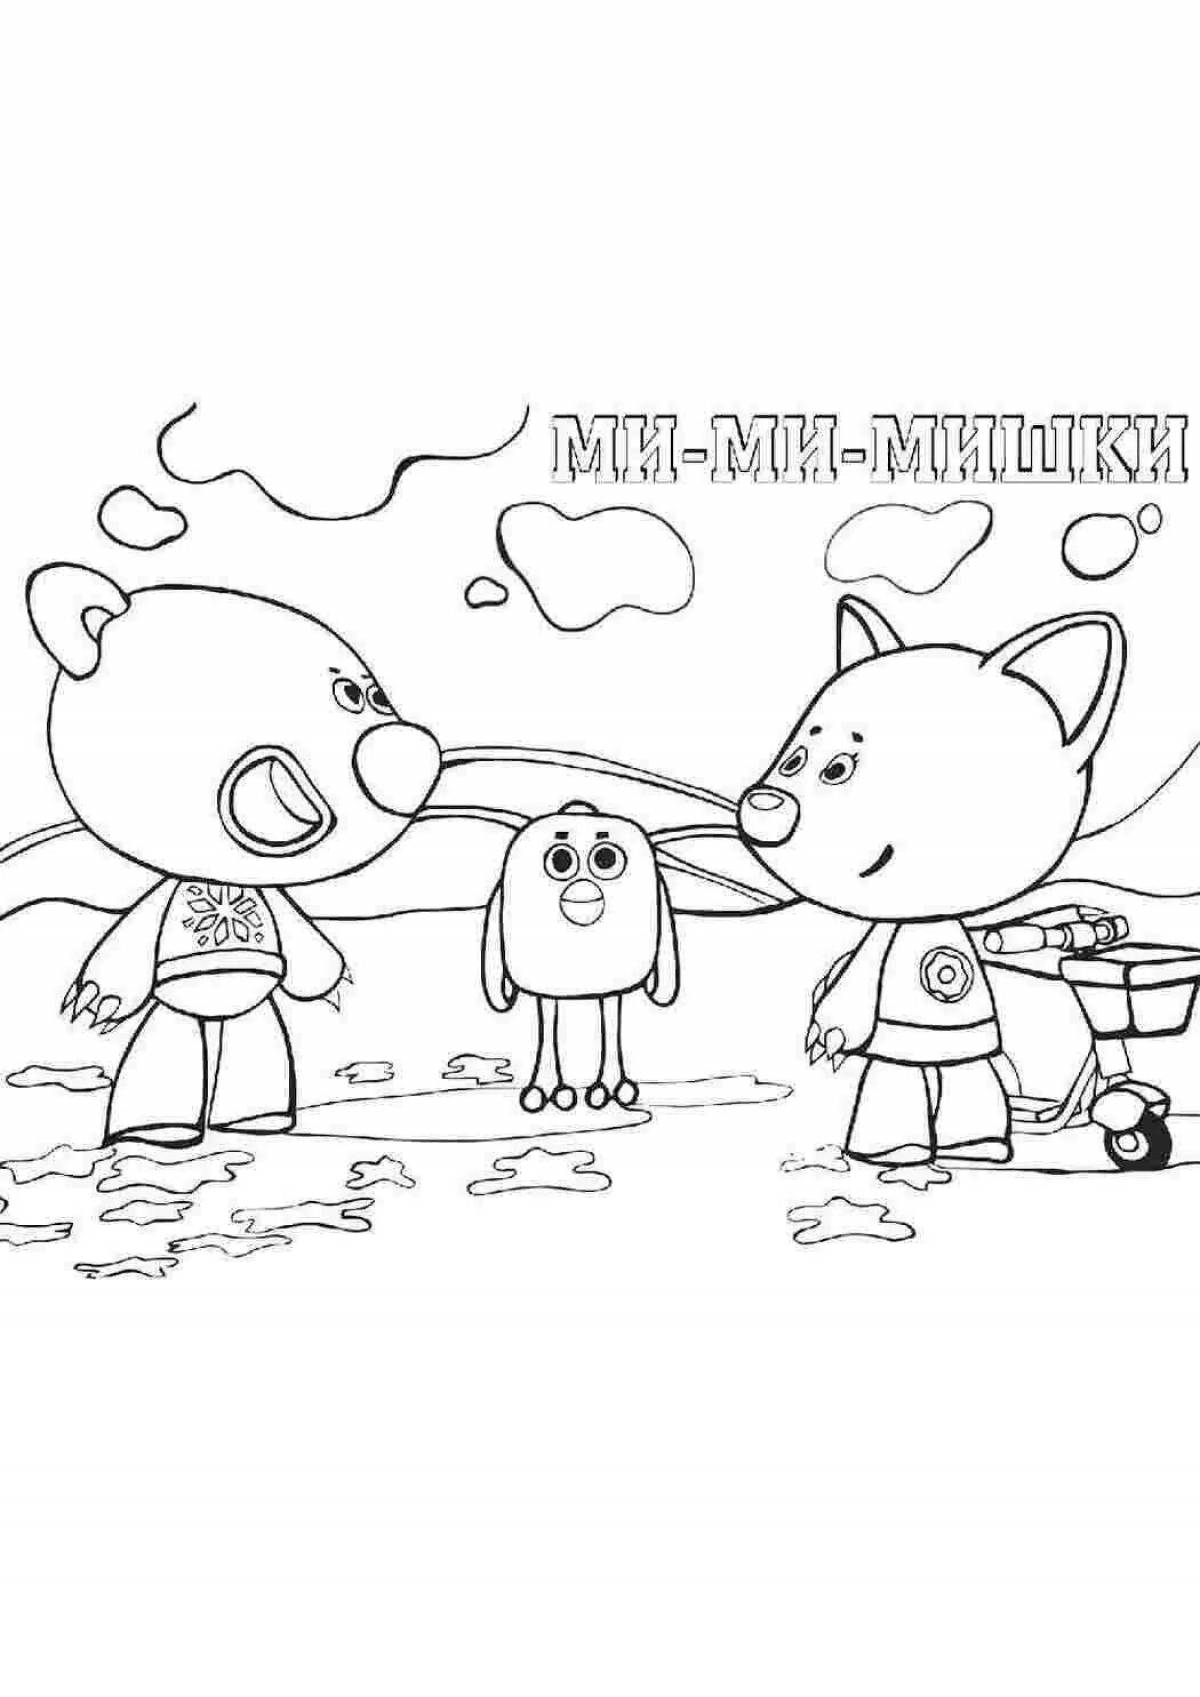 Animated fox bear coloring pages